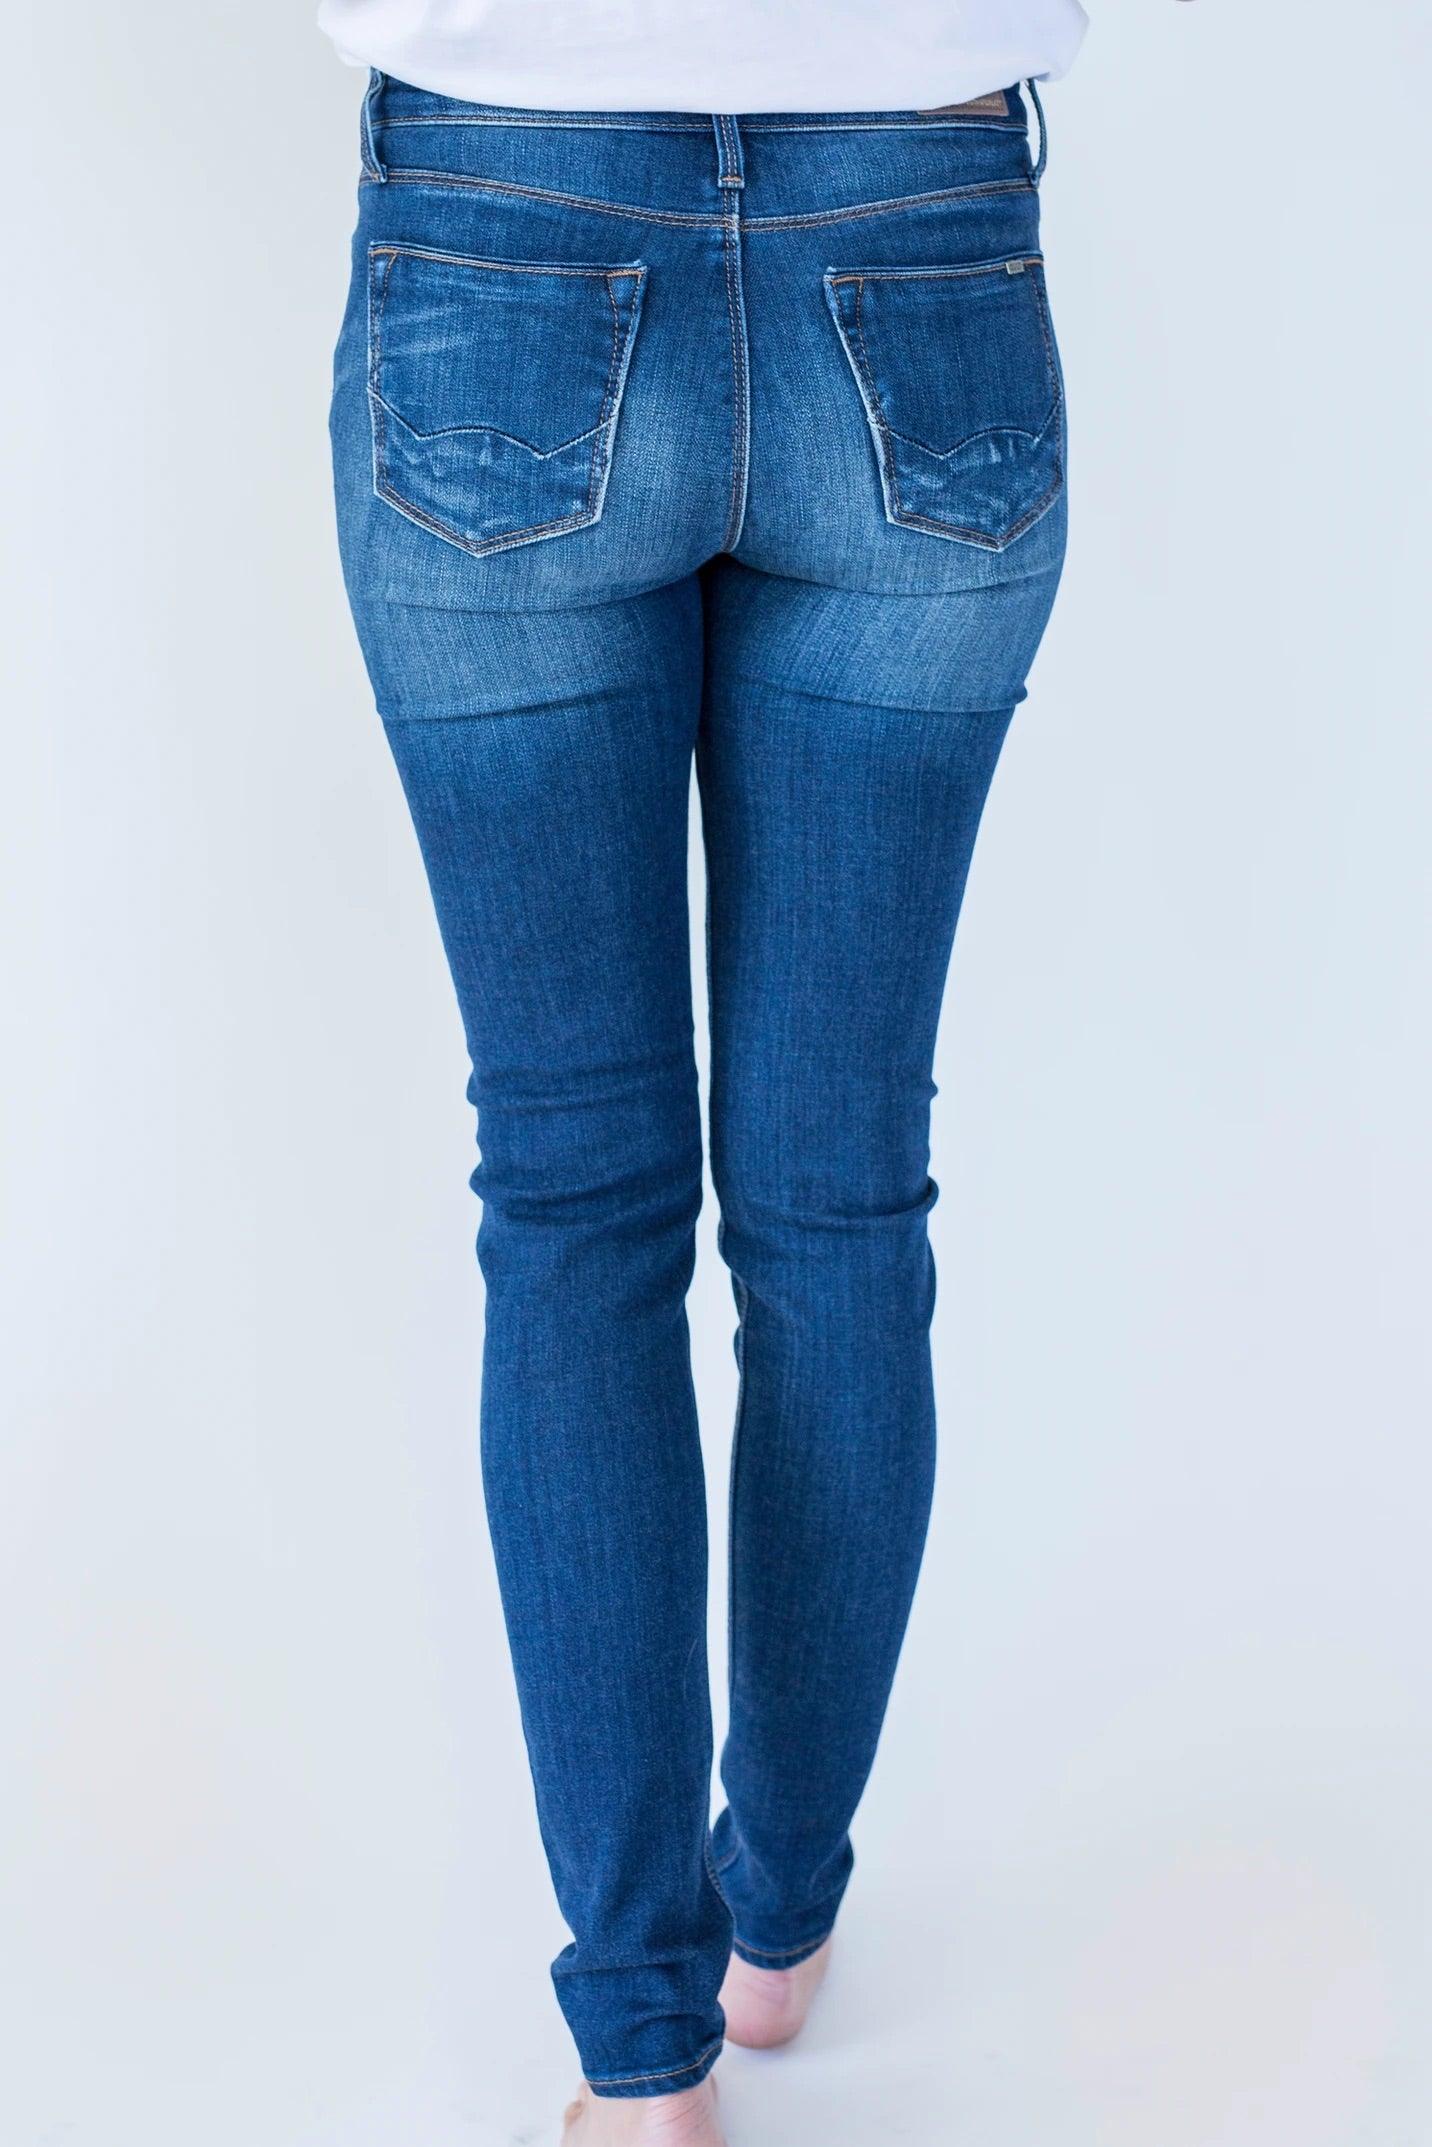 Vintage - Gypsy High Rise Jeans - Outline Clothing NZ